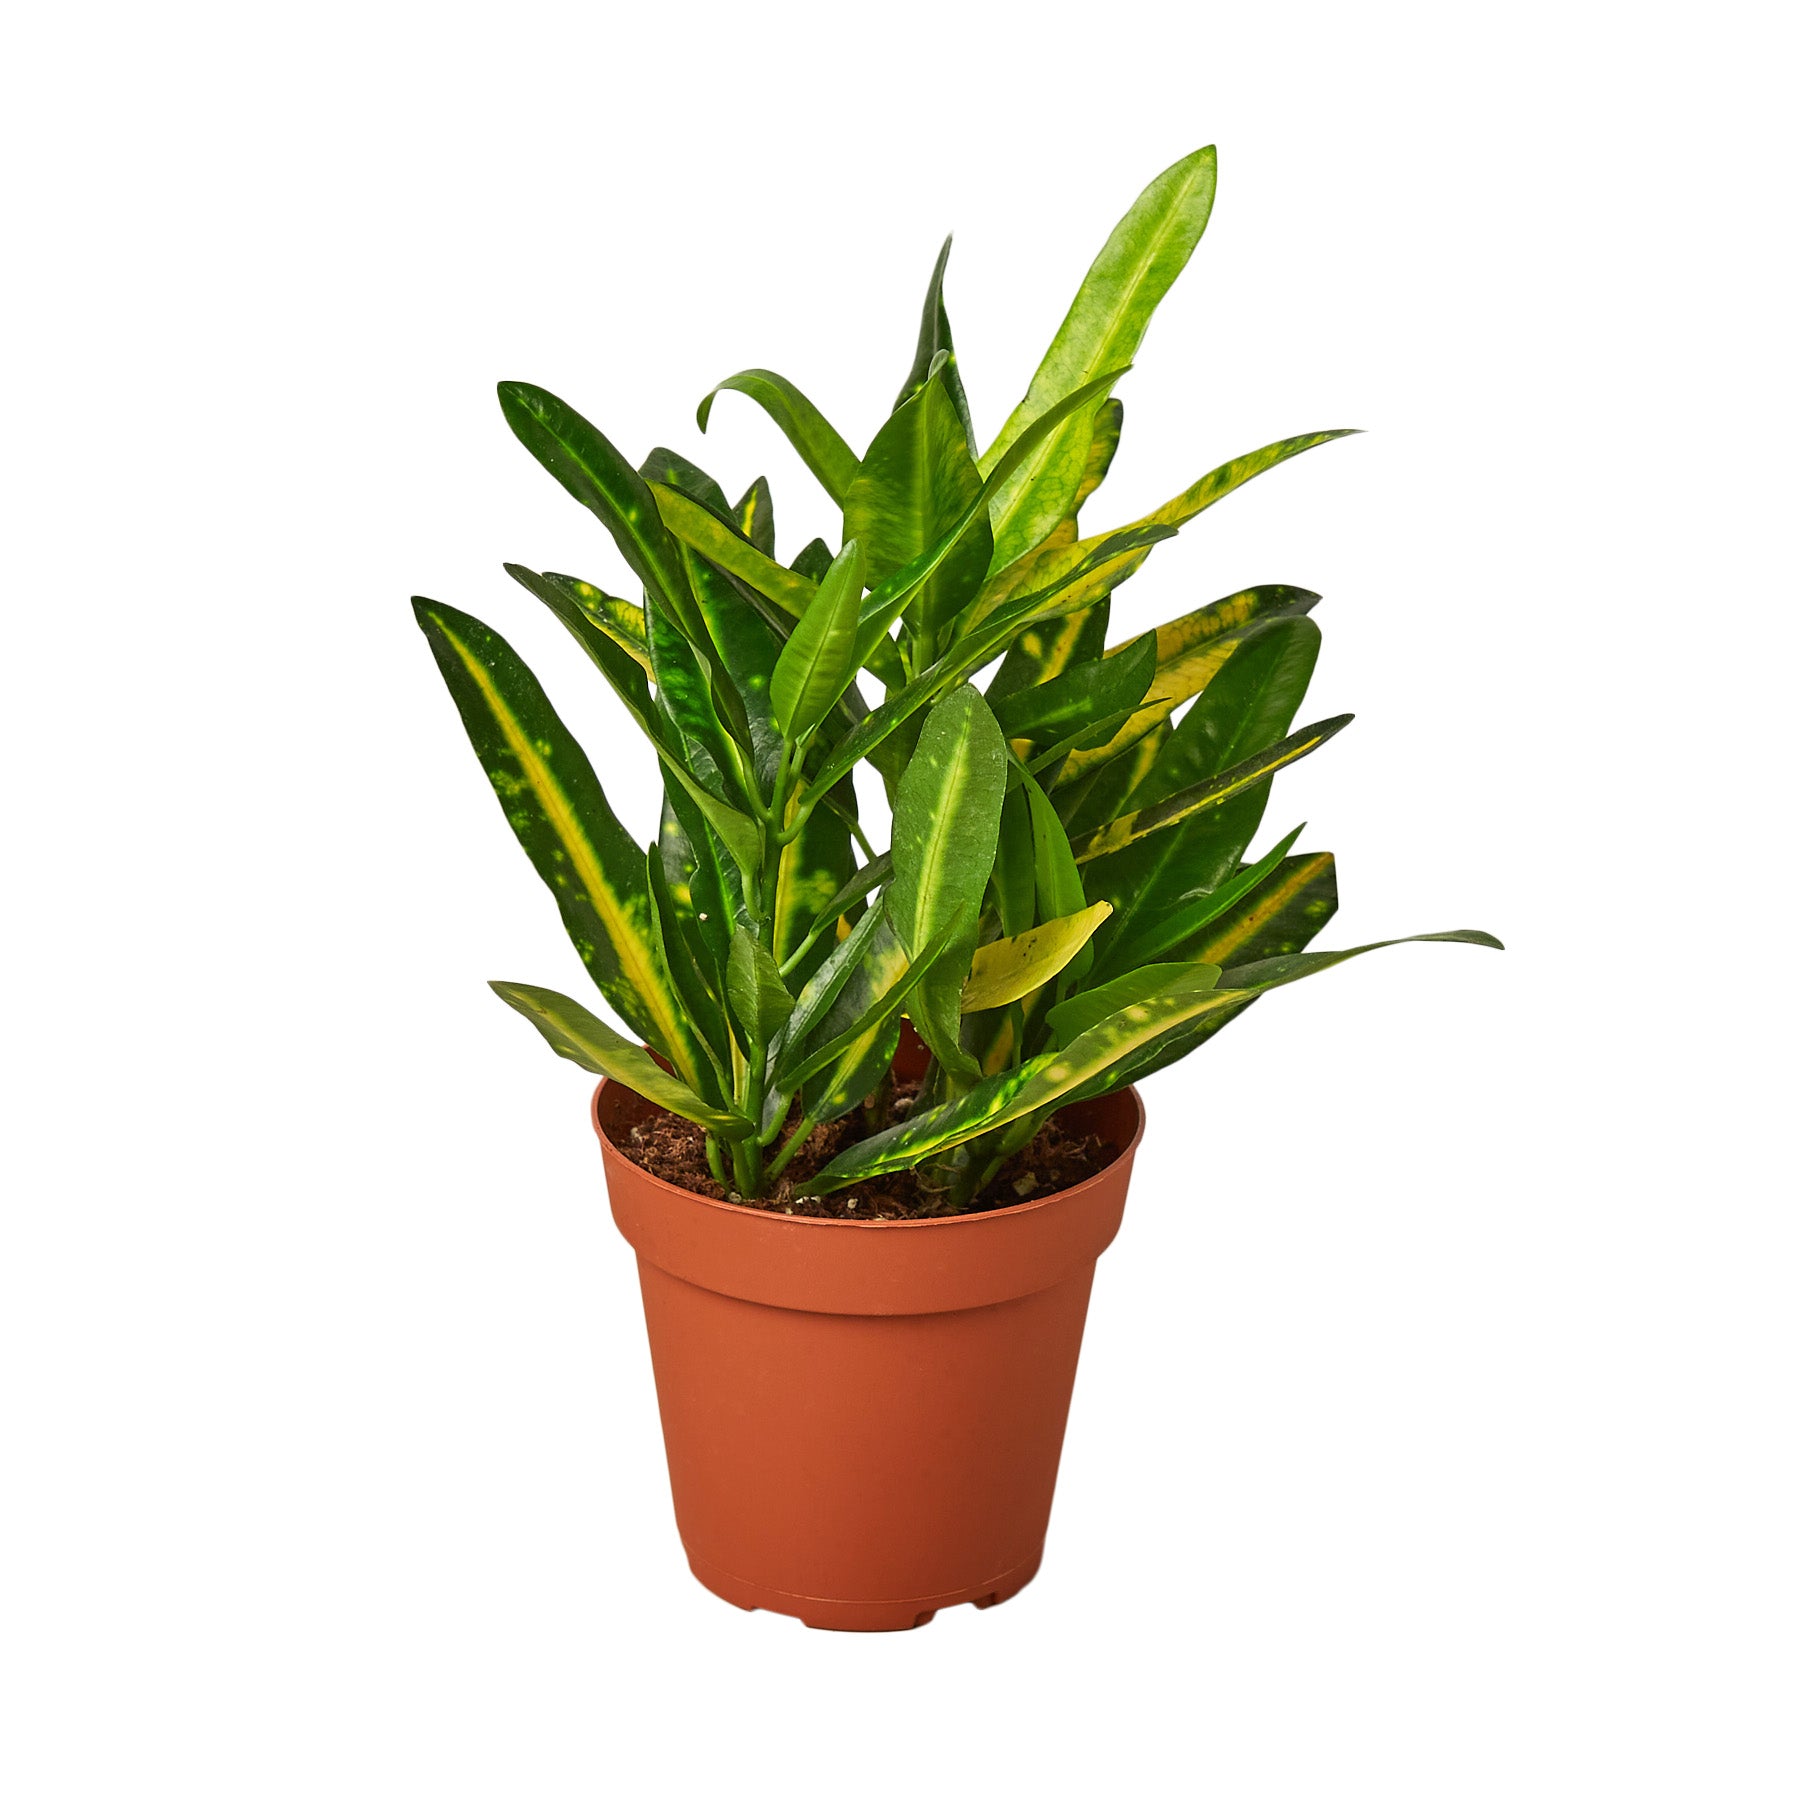 A potted plant on a clean background.